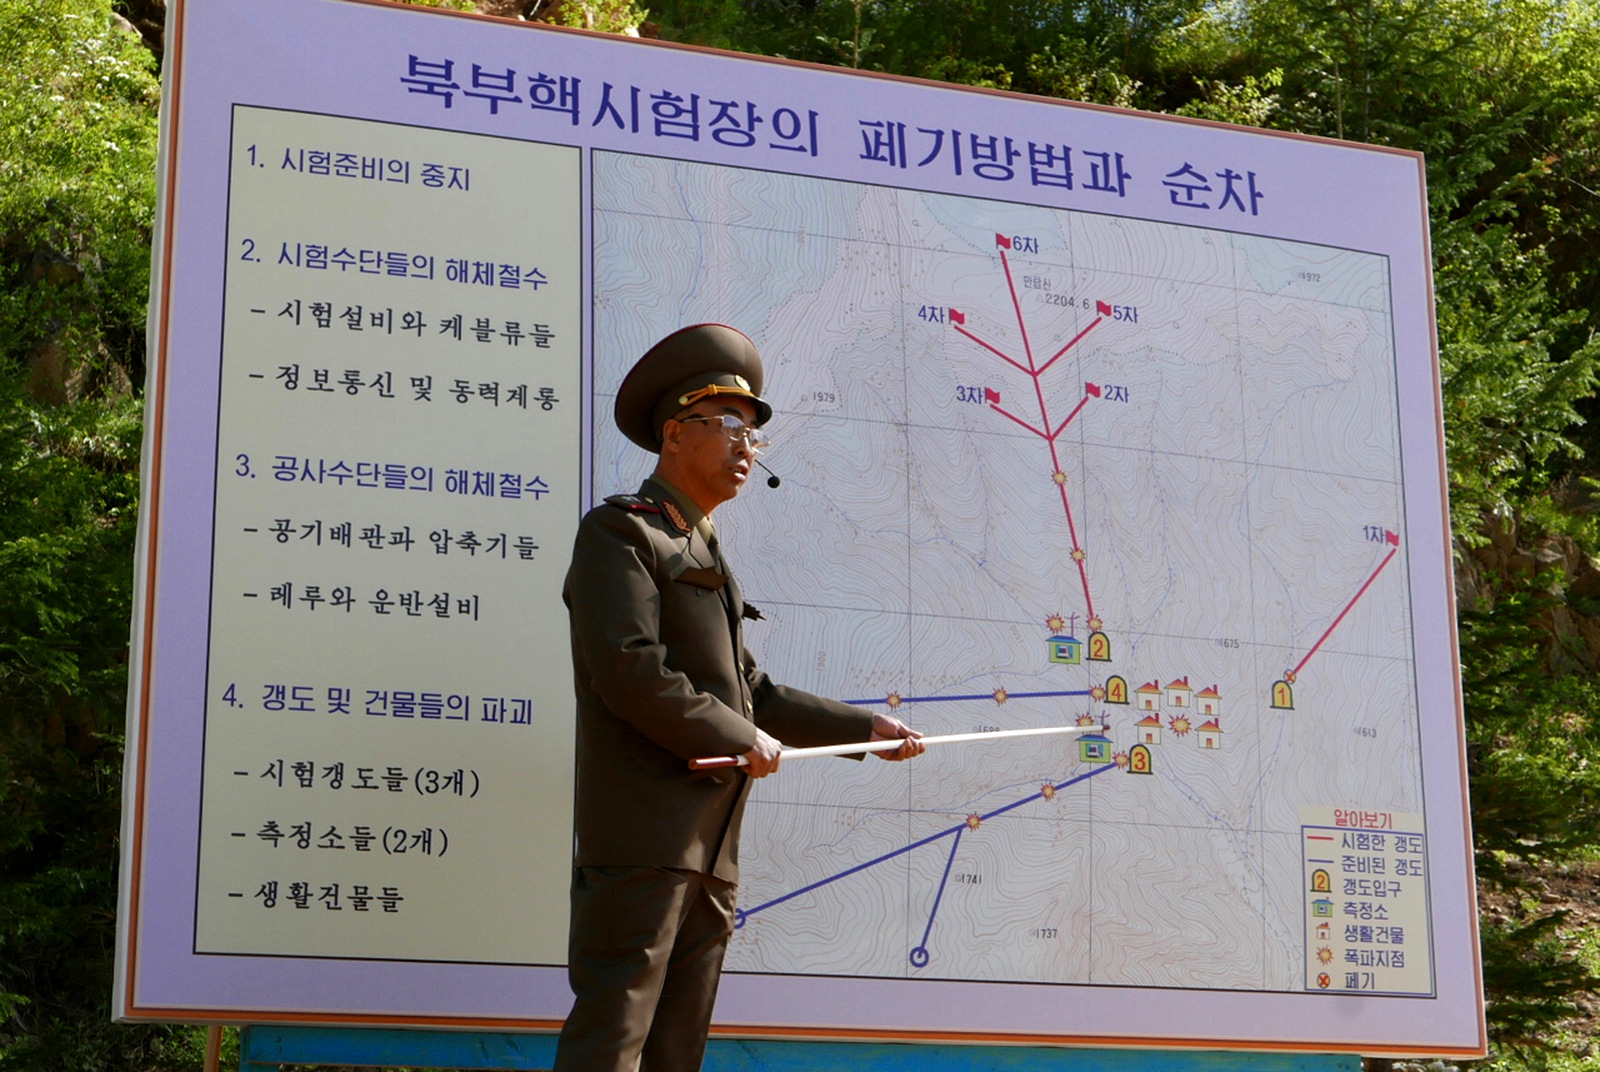 The Deputy Director of North Korea's Nuclear Weapons Institute briefs reporters about the dismantling of North Korea's nuclear test site, in Punggye-ri, May 24, 2018. APTN via AP